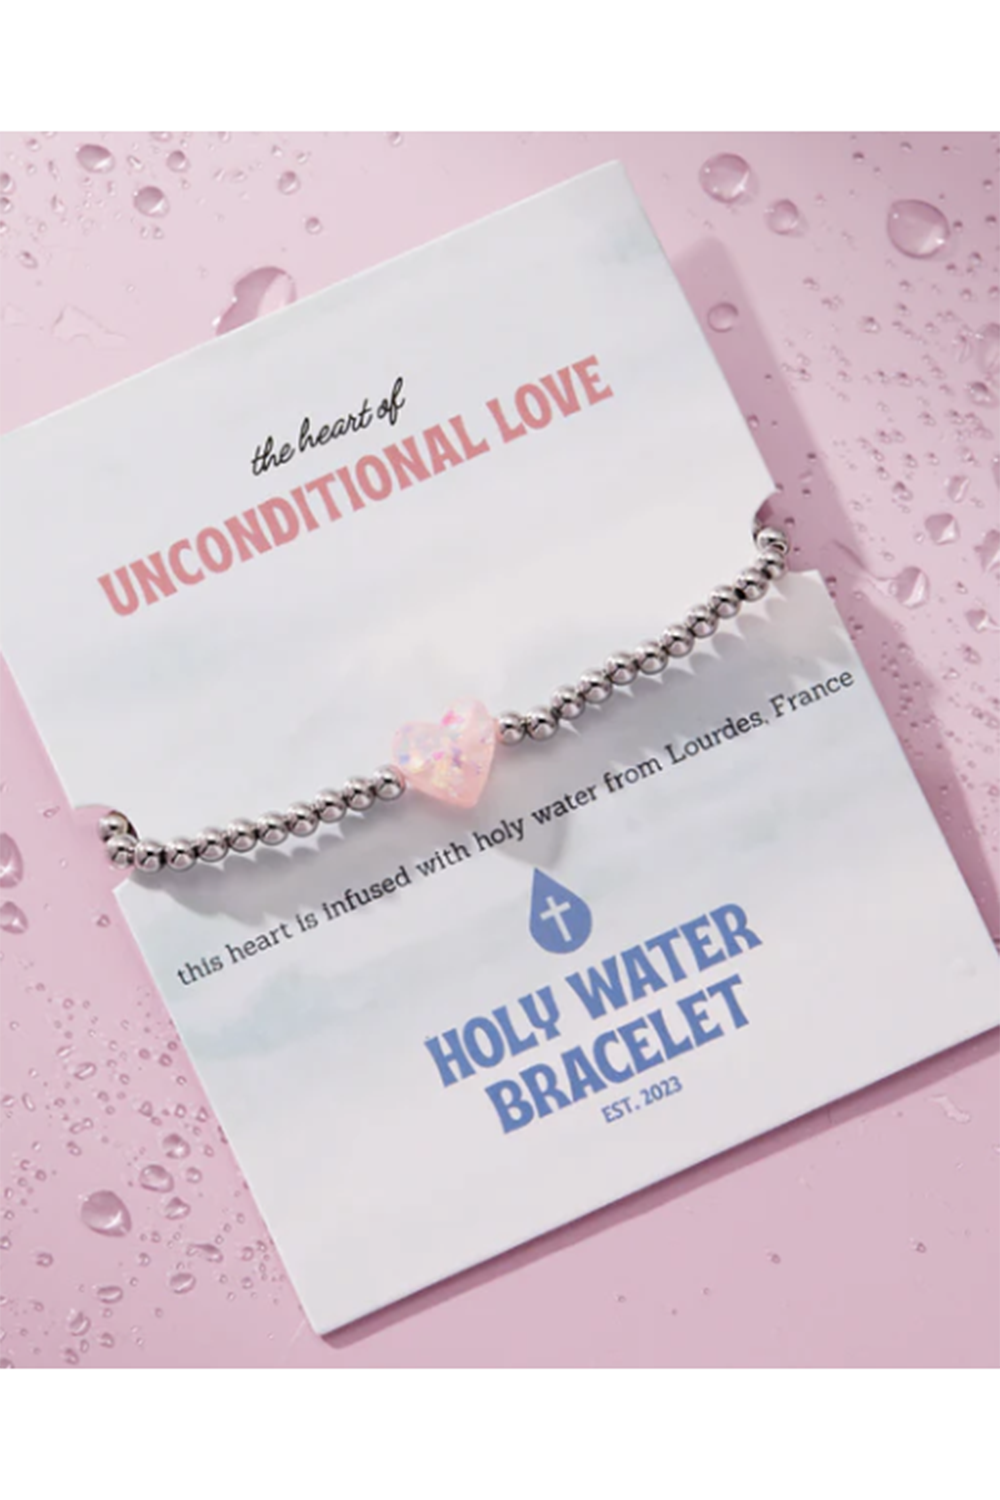 Holy Water Bracelet - Unconditional Love Pink Heart Silver